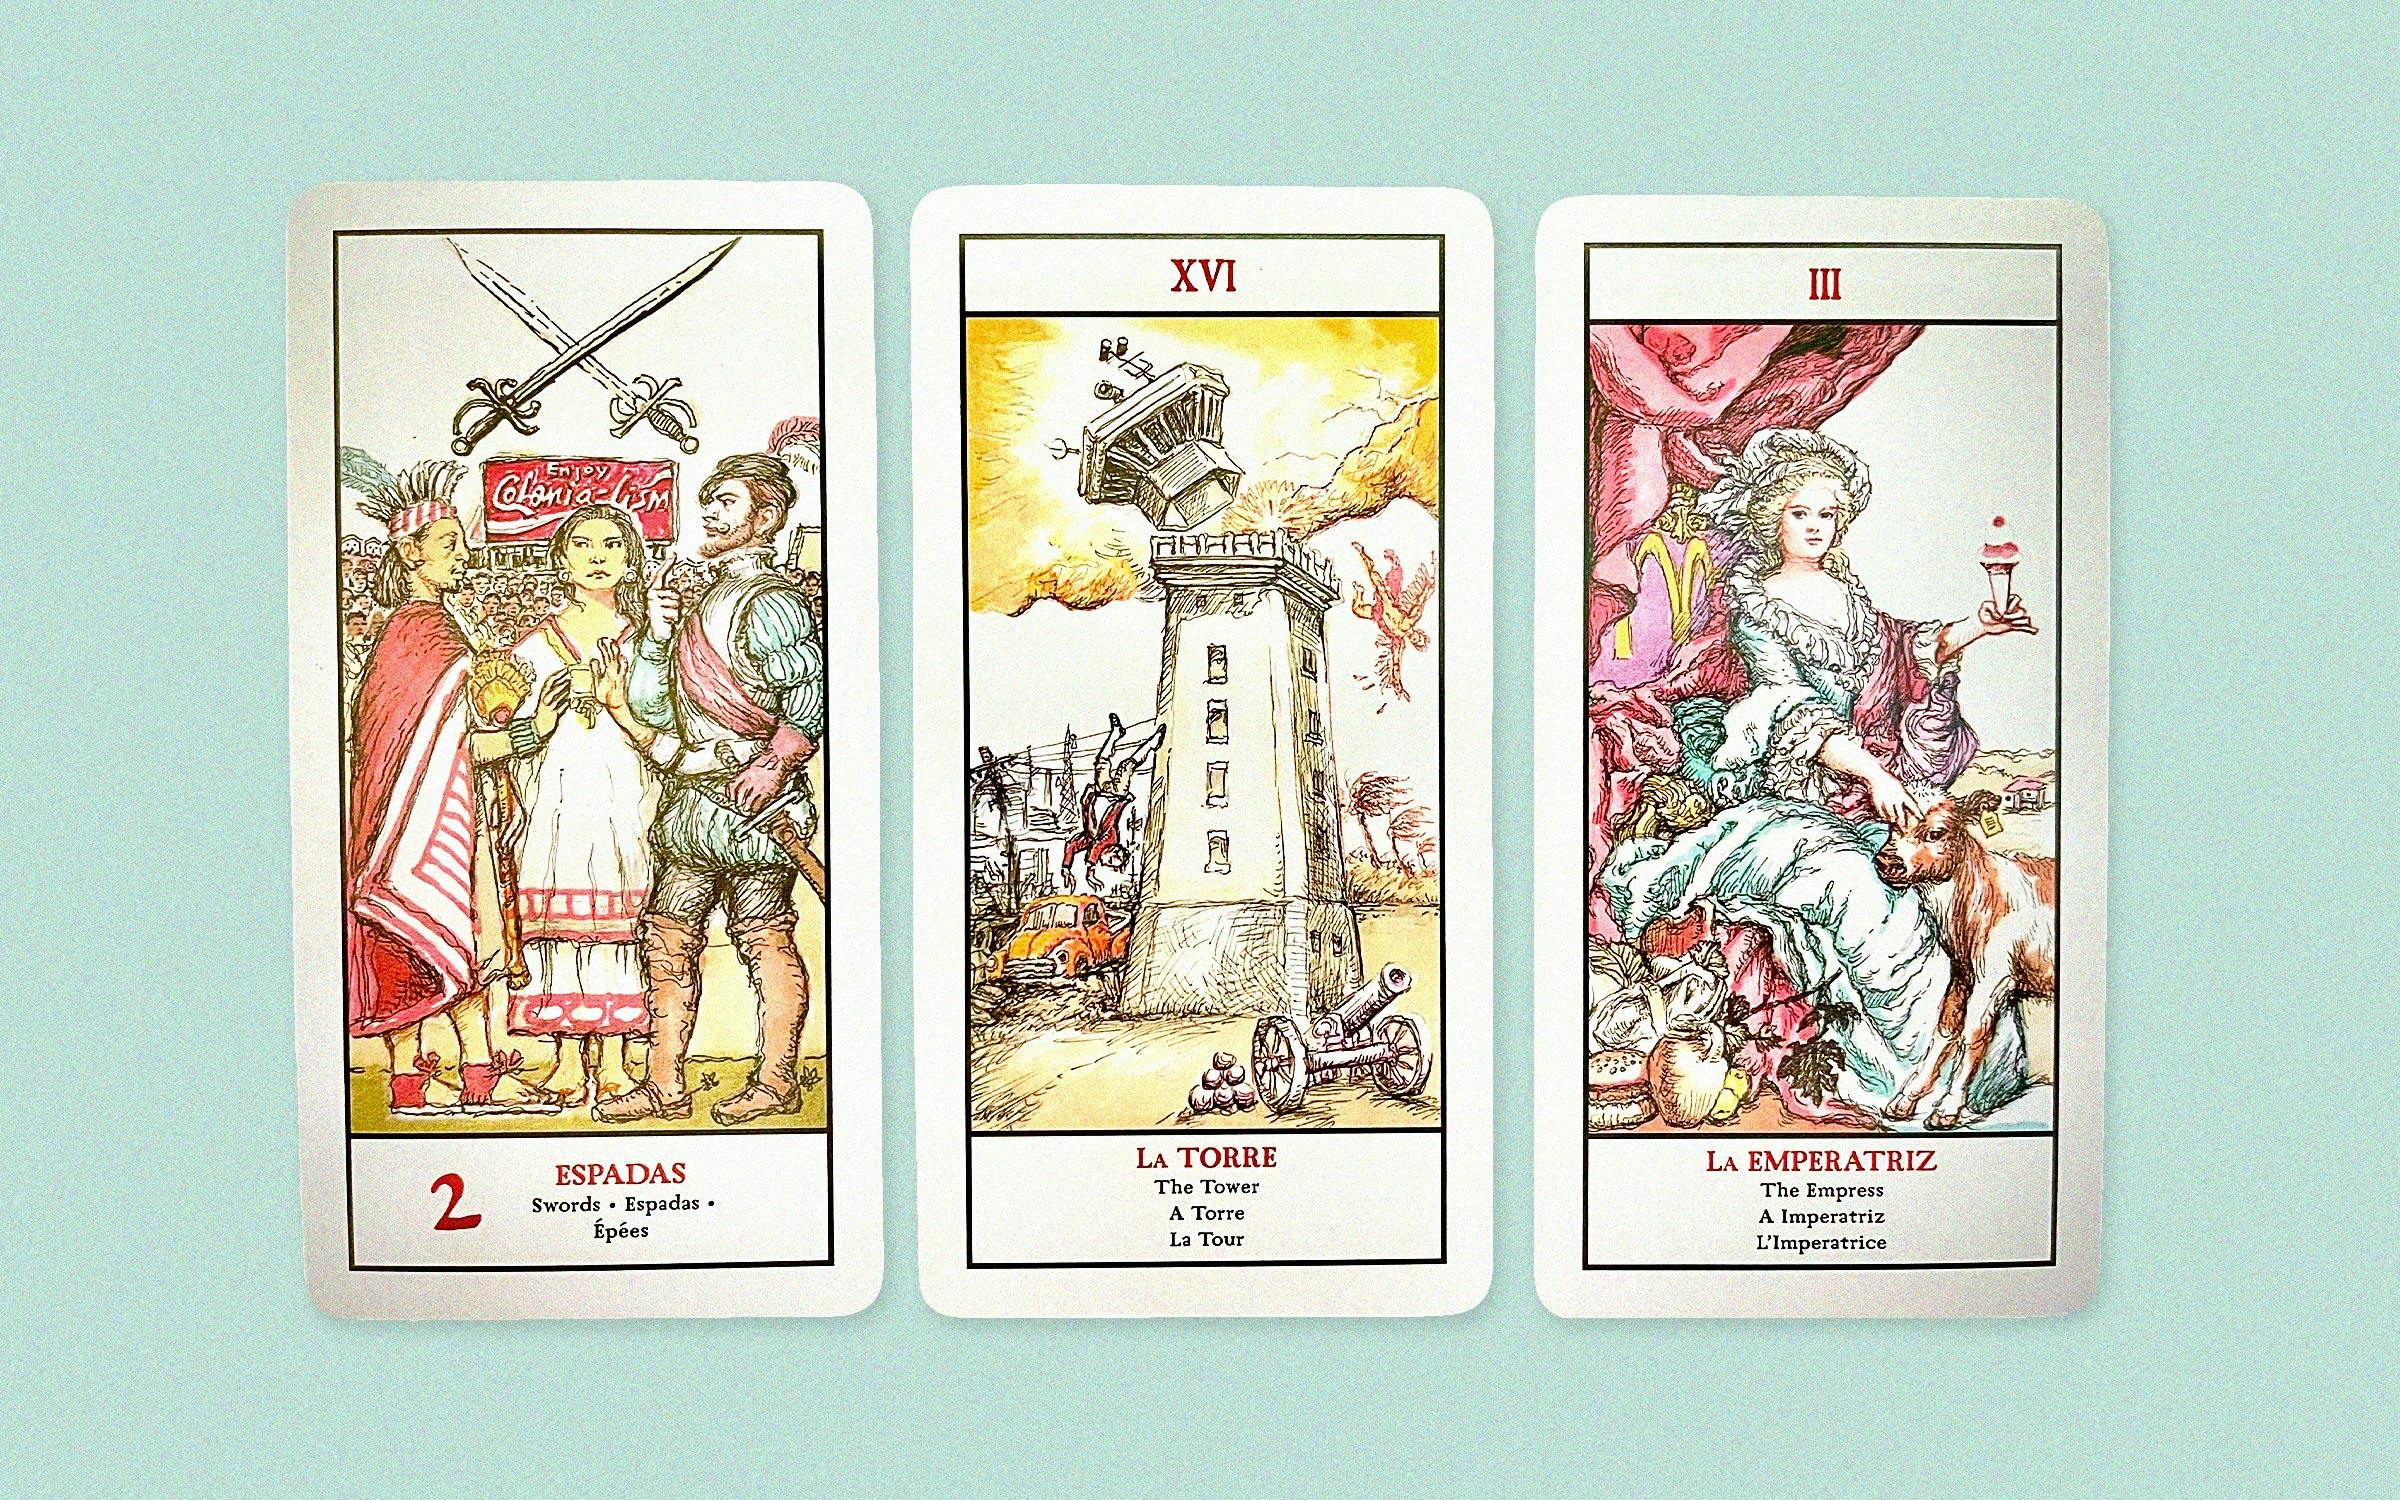 A Houston Artist Packs Insight Into This "Neocolonial" Tarot Deck